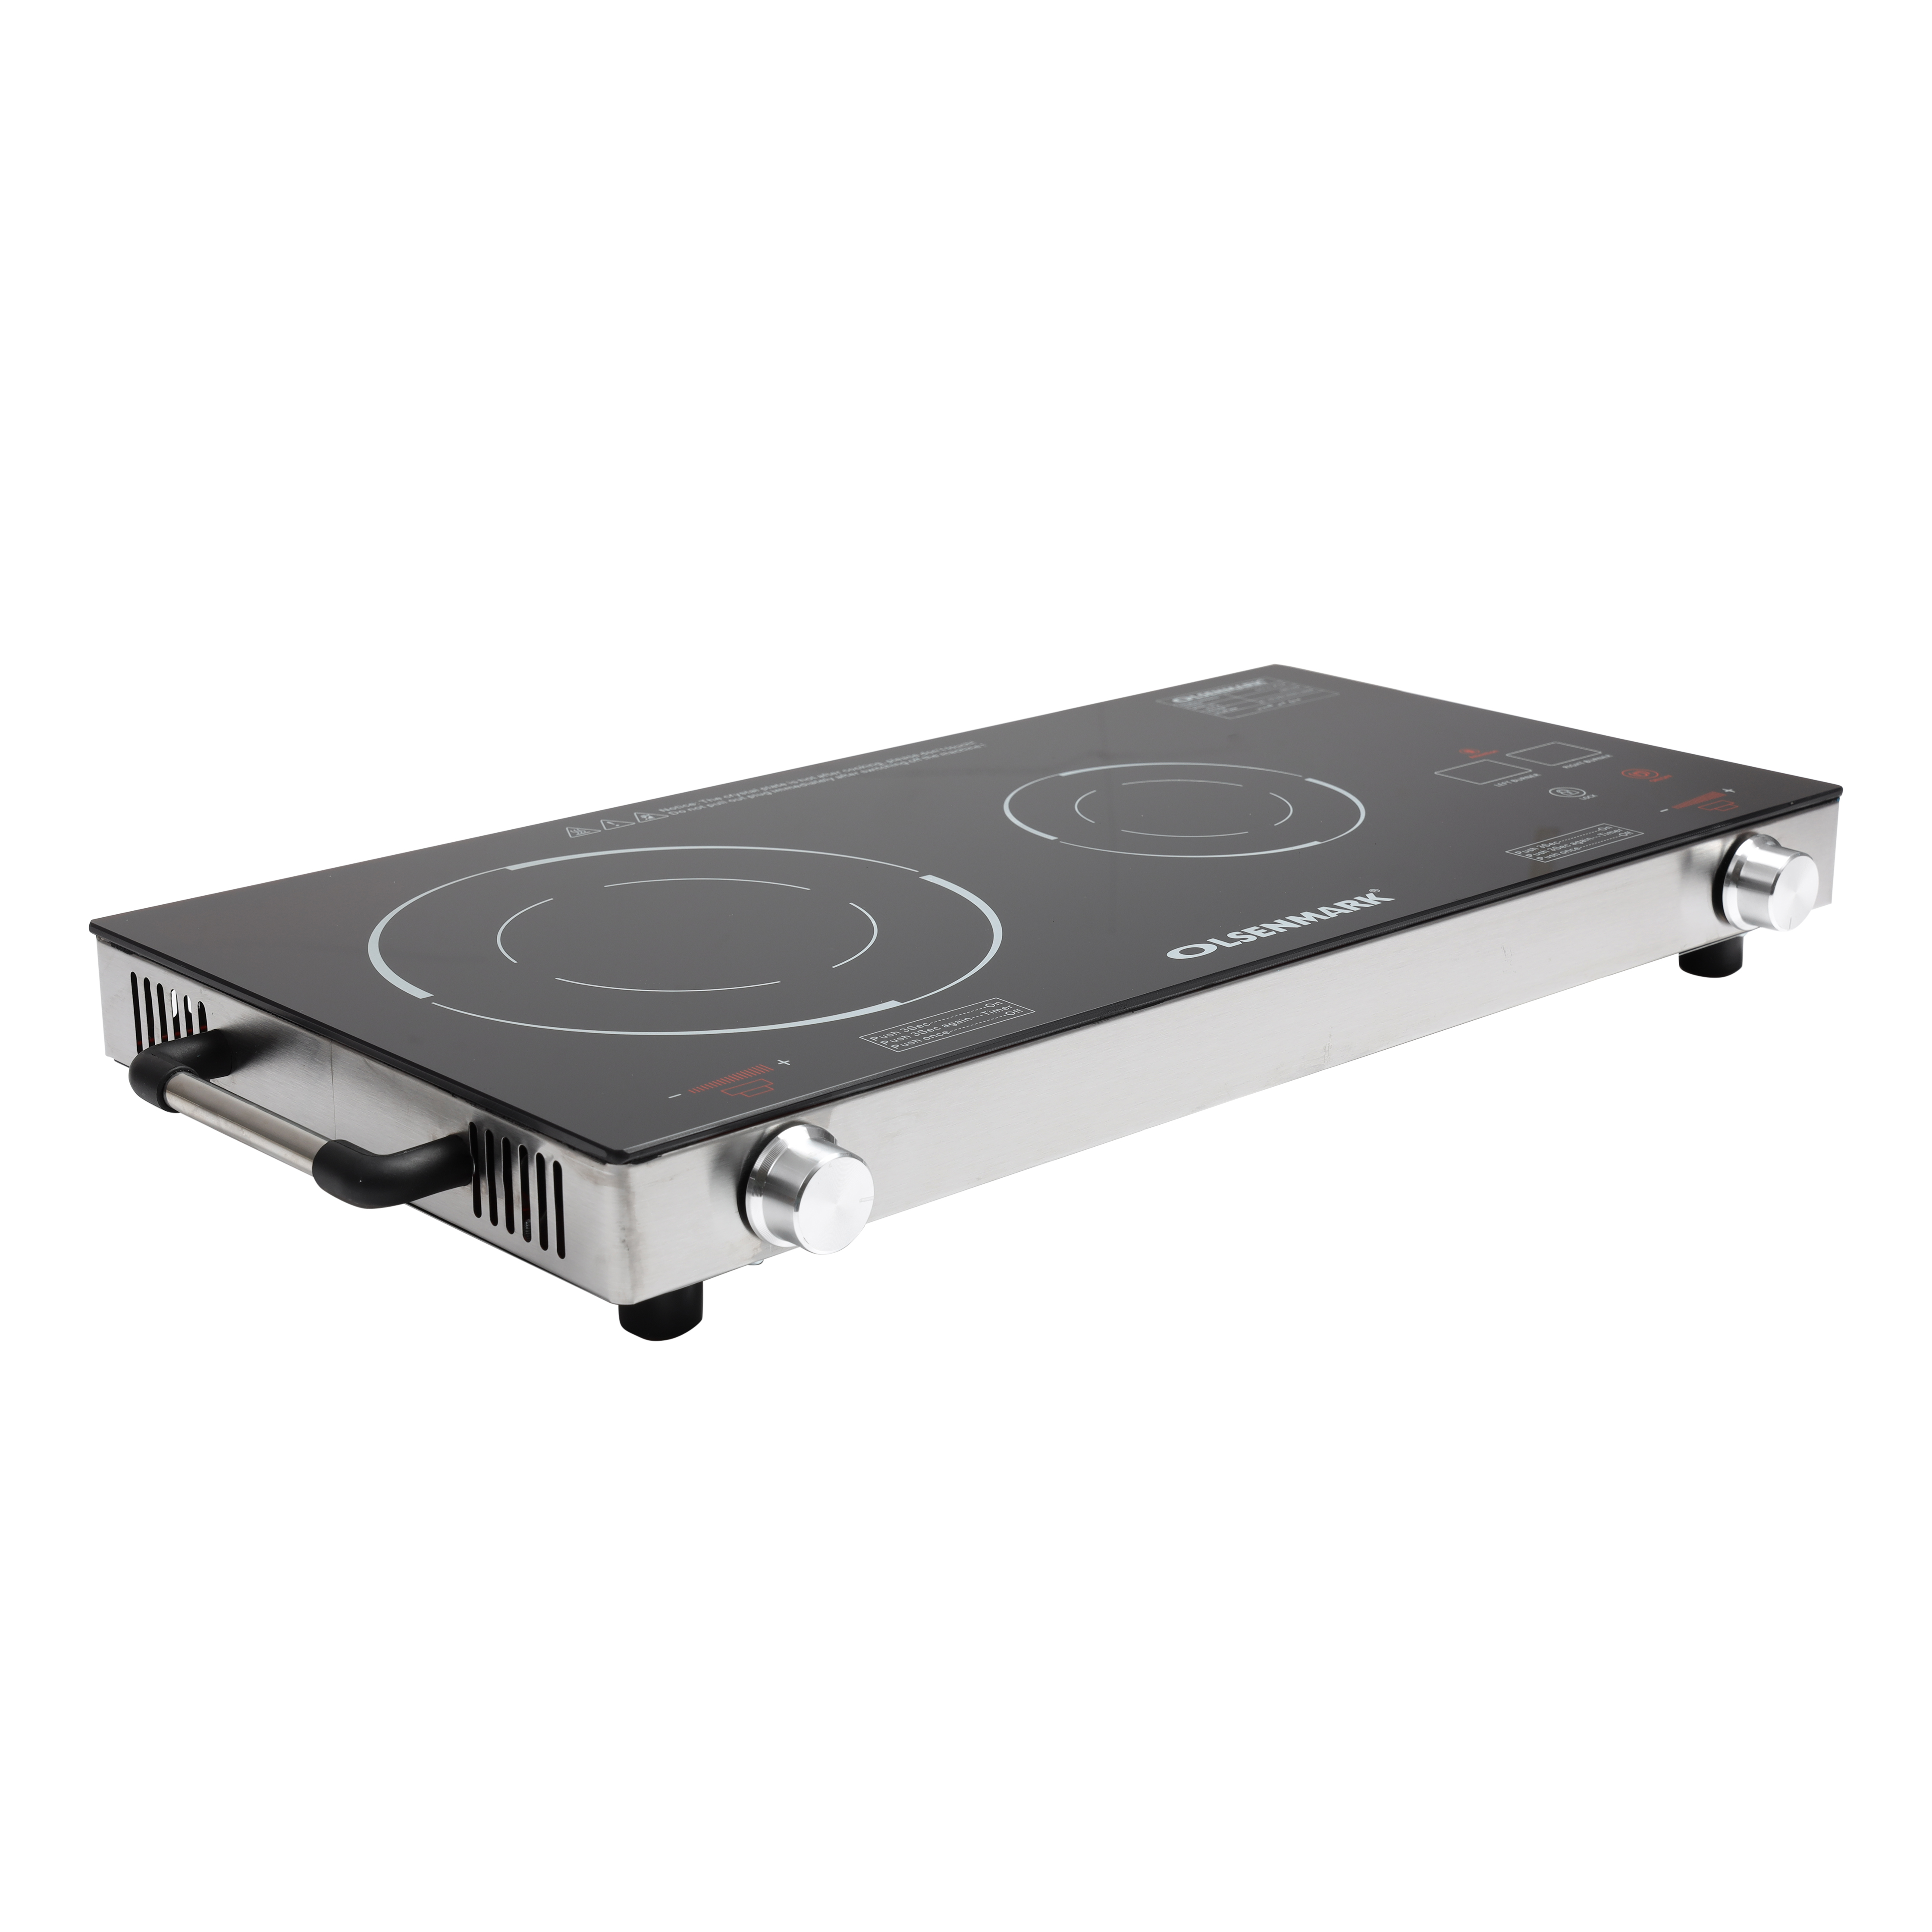 Double Infrared Cooktop SmoothCook, SCP 2803BK